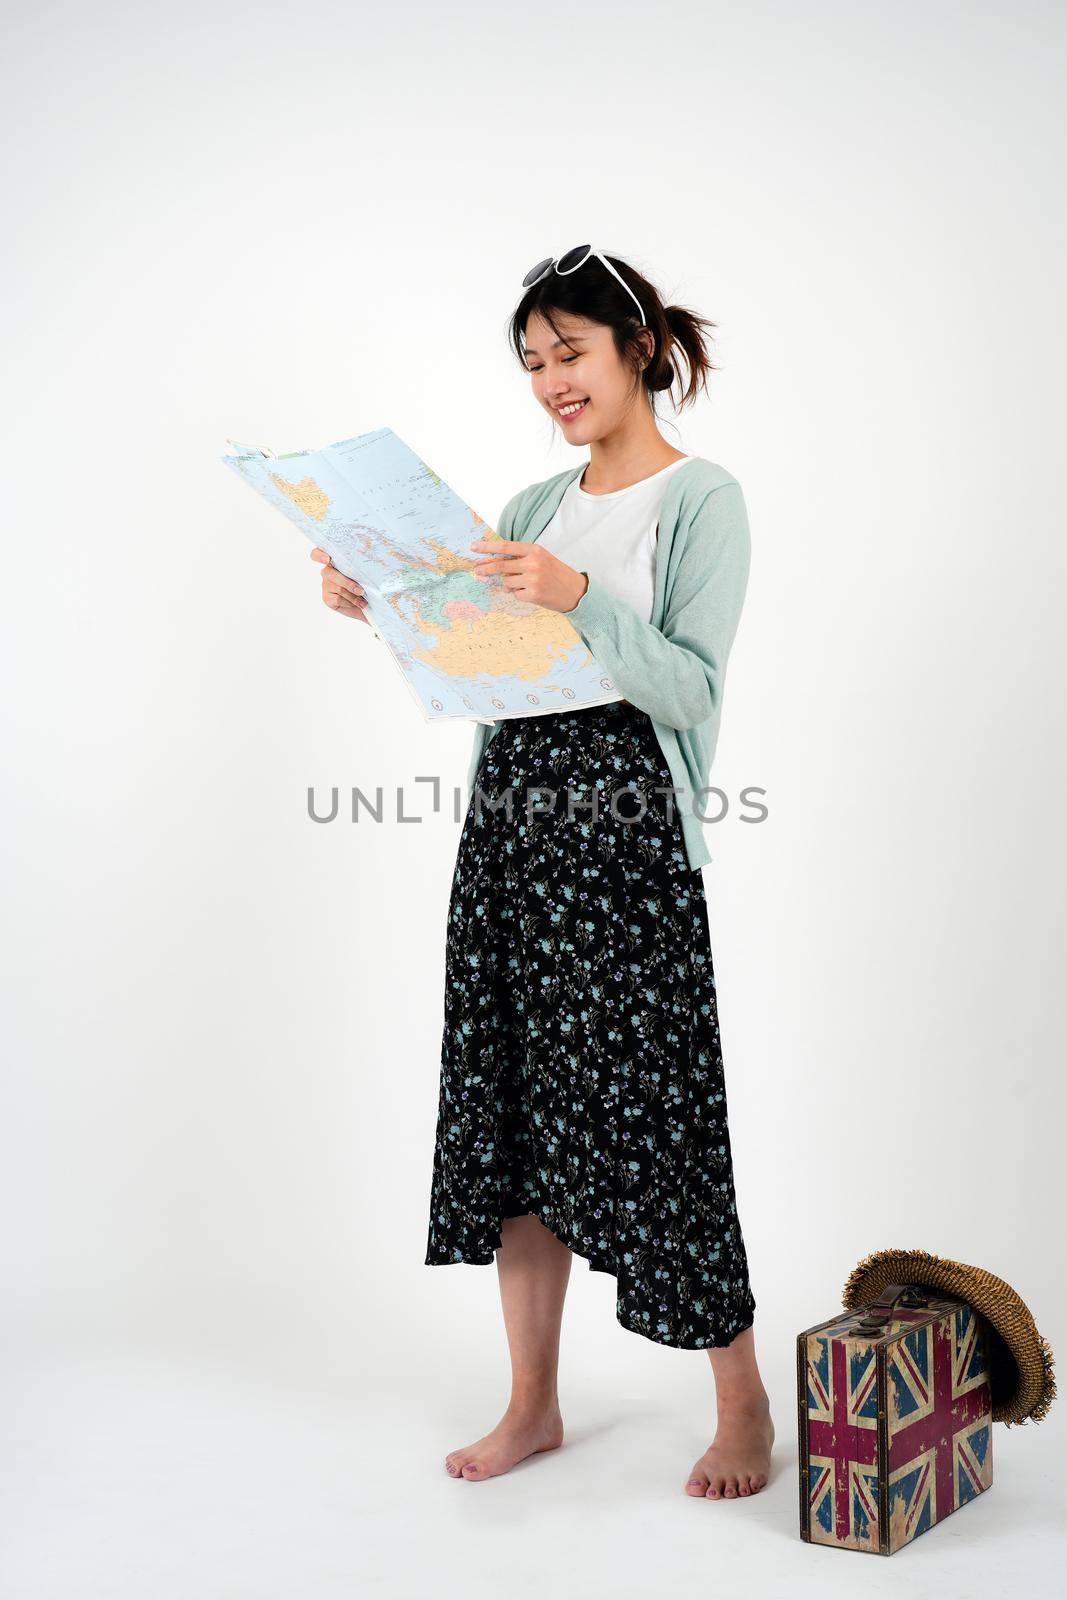 Positive smiling young asian female tourist searches for inspiring places, holds paper map, finds new sightseeing for discovering, wears round spectacles, isolated on white studio wall.